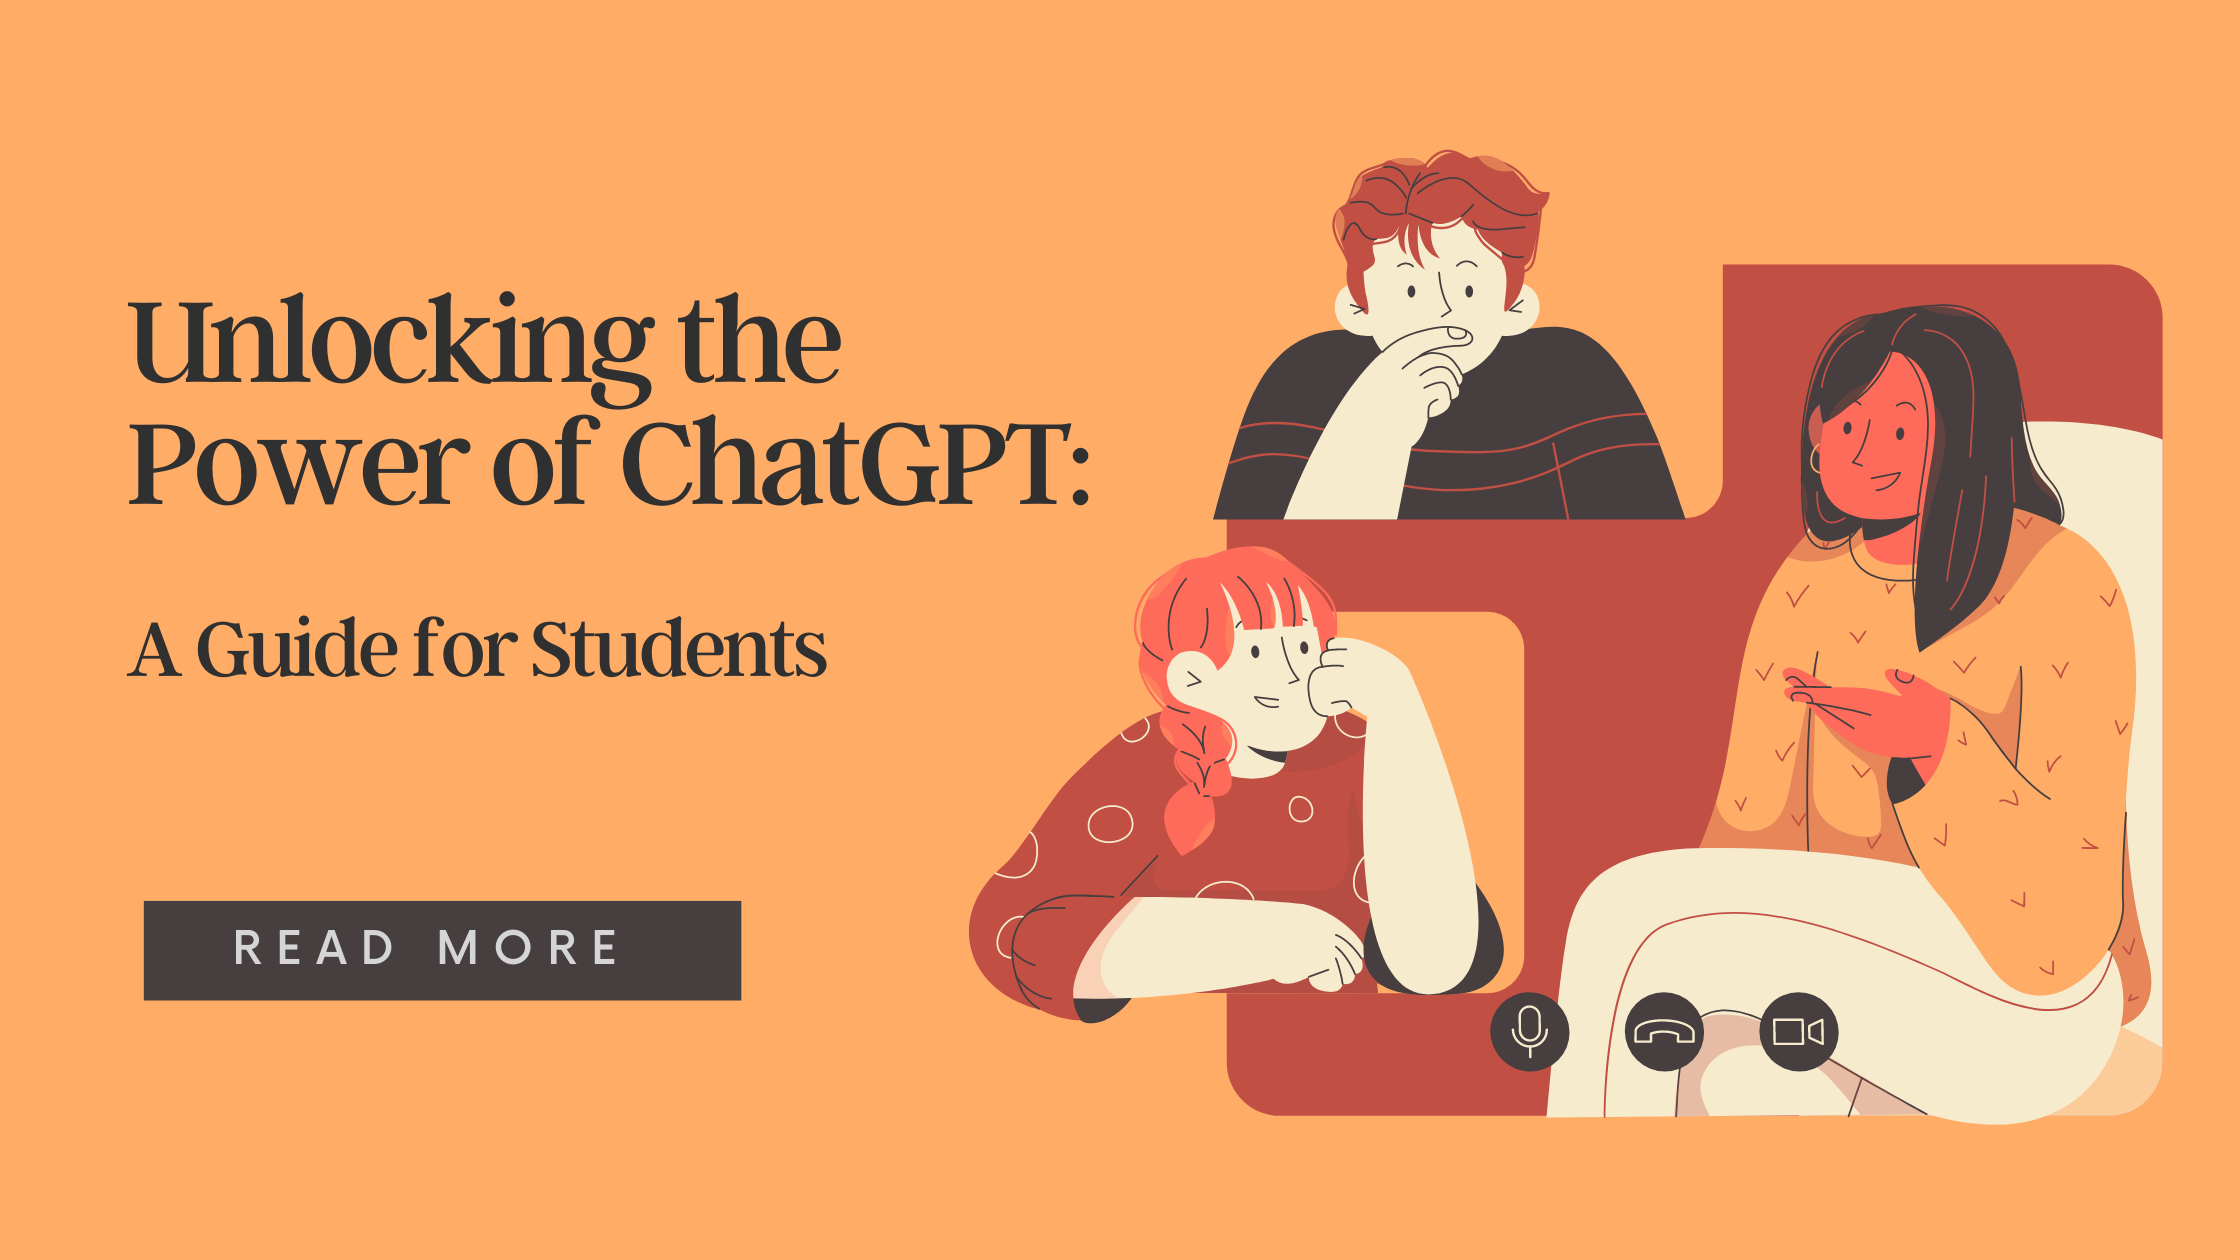 unlocking-the-power-of-chatgpt-a-guide-for-students-in-their-job-search-journey